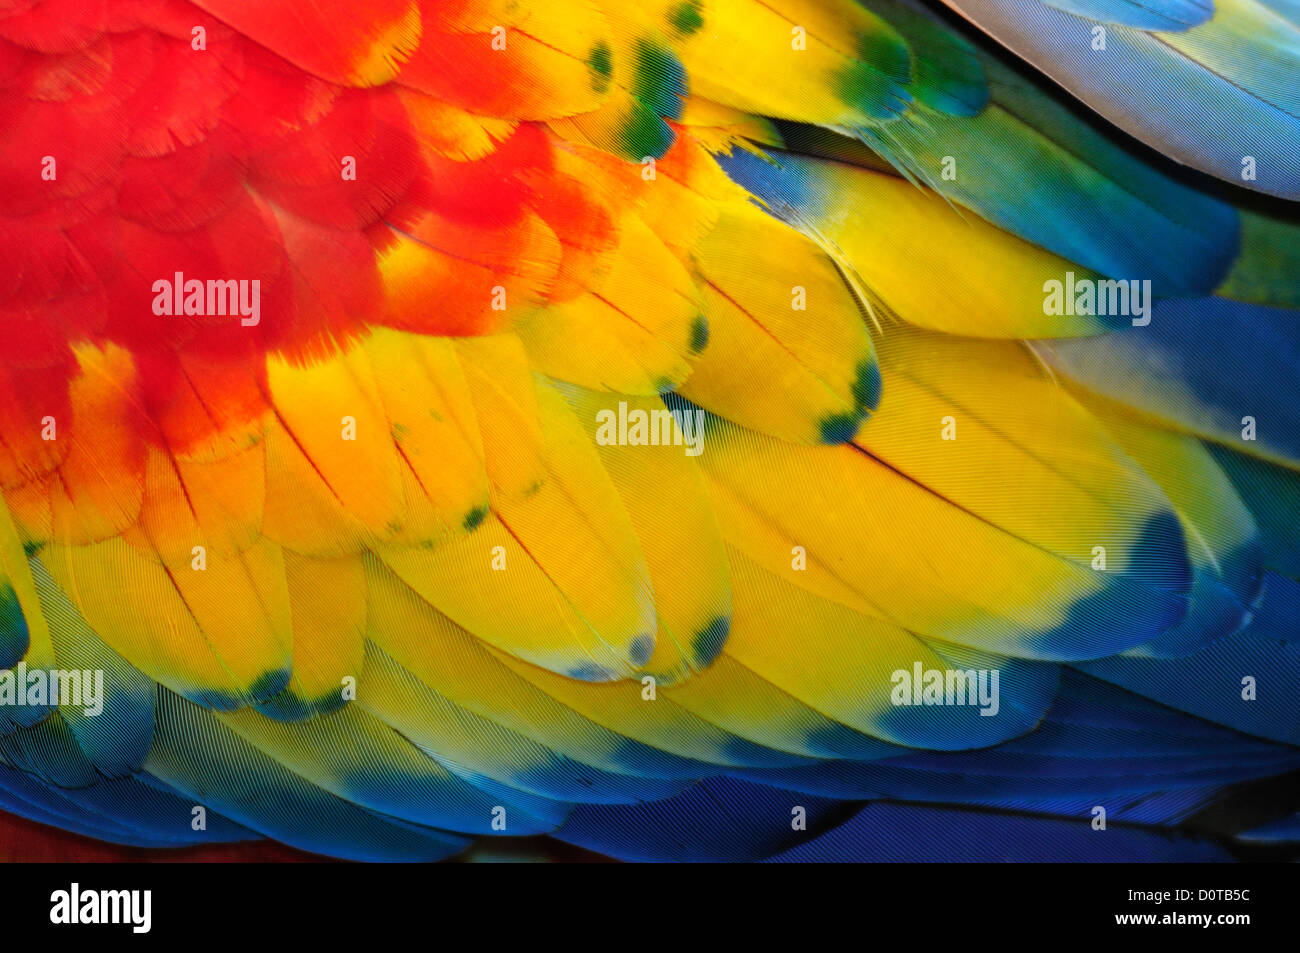 Macaw, parrots, Central America, Honduras, feathers, colours, concepts, Stock Photo